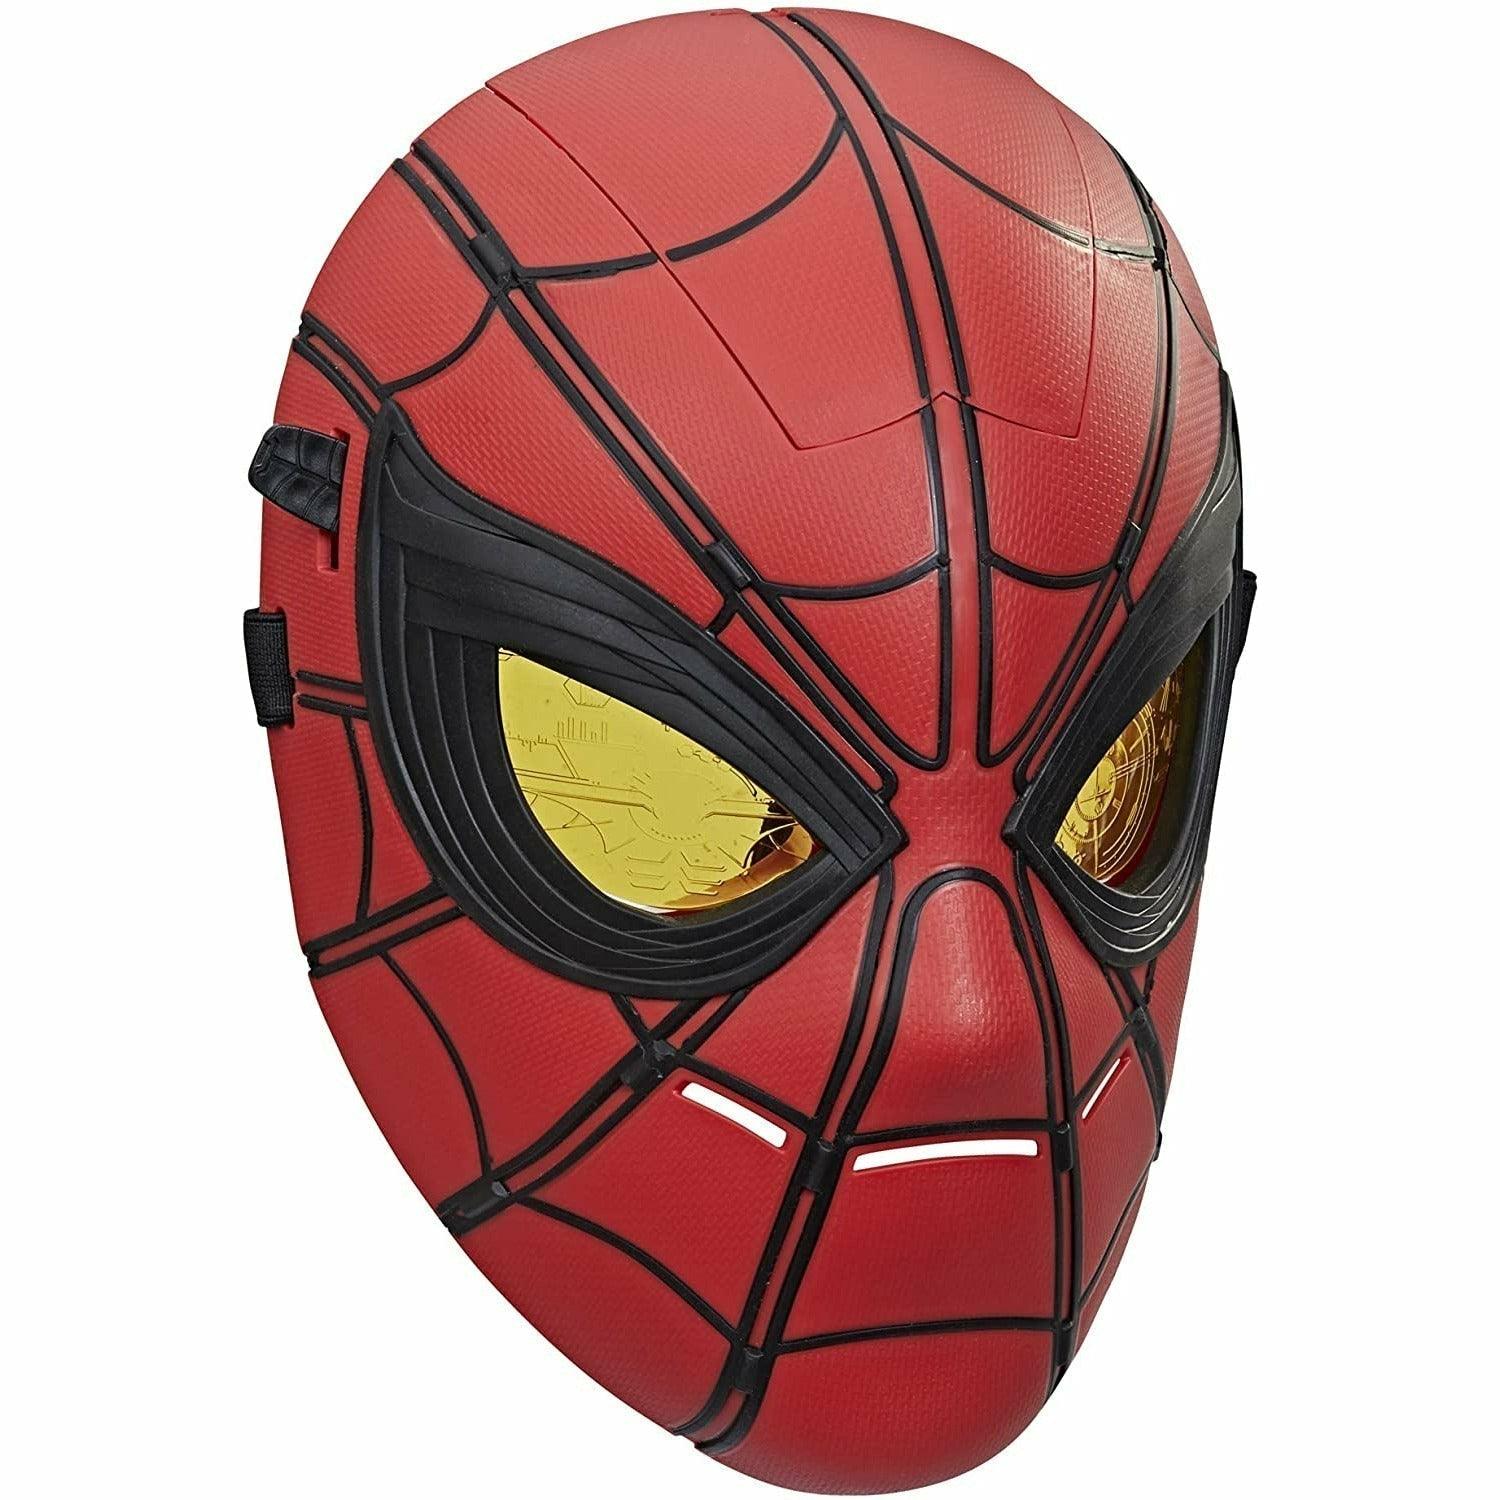 Spider-Man Marvel Glow FX Mask Electronic Wearable Toy with Light-Up Moving Eyes for Role Play - BumbleToys - 6+ Years, 8-13 Years, Action Figures, Avengers, Bike, Boys, Characters, Eagle Plus, Marvel, OXE, Pre-Order, Spider man, Spiderman